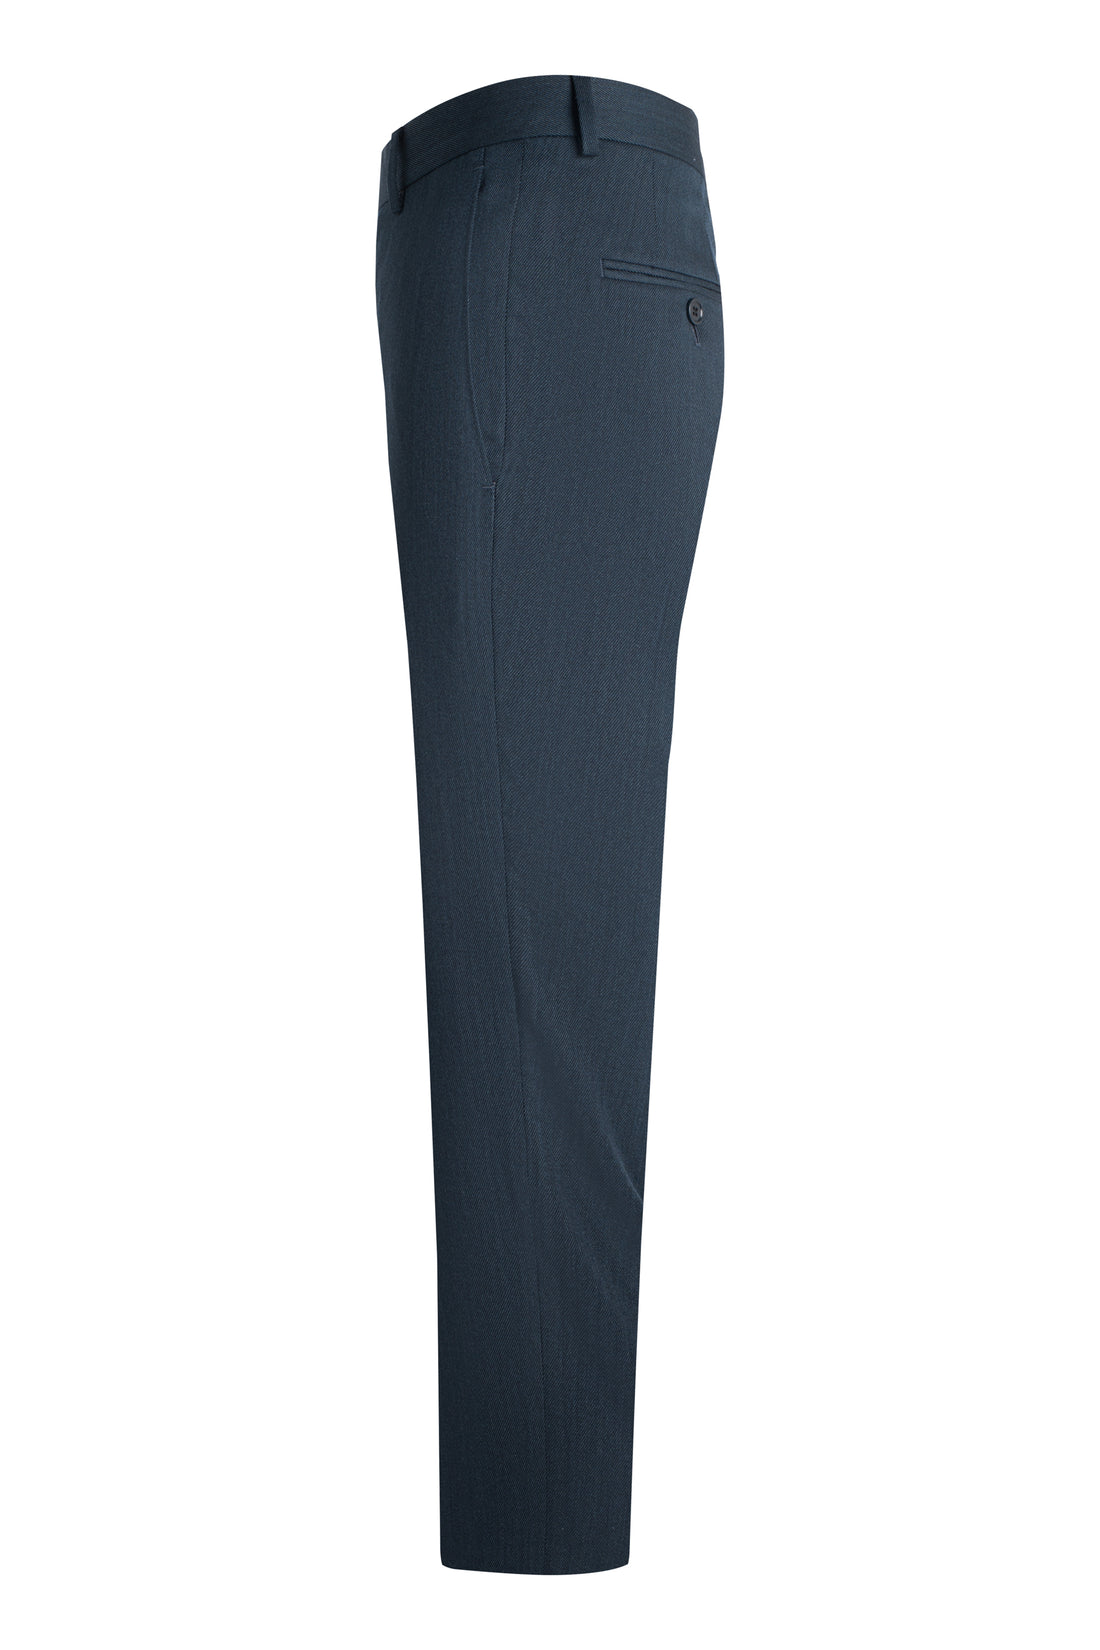 Blue Wool Stretch Whipcord Trousers side